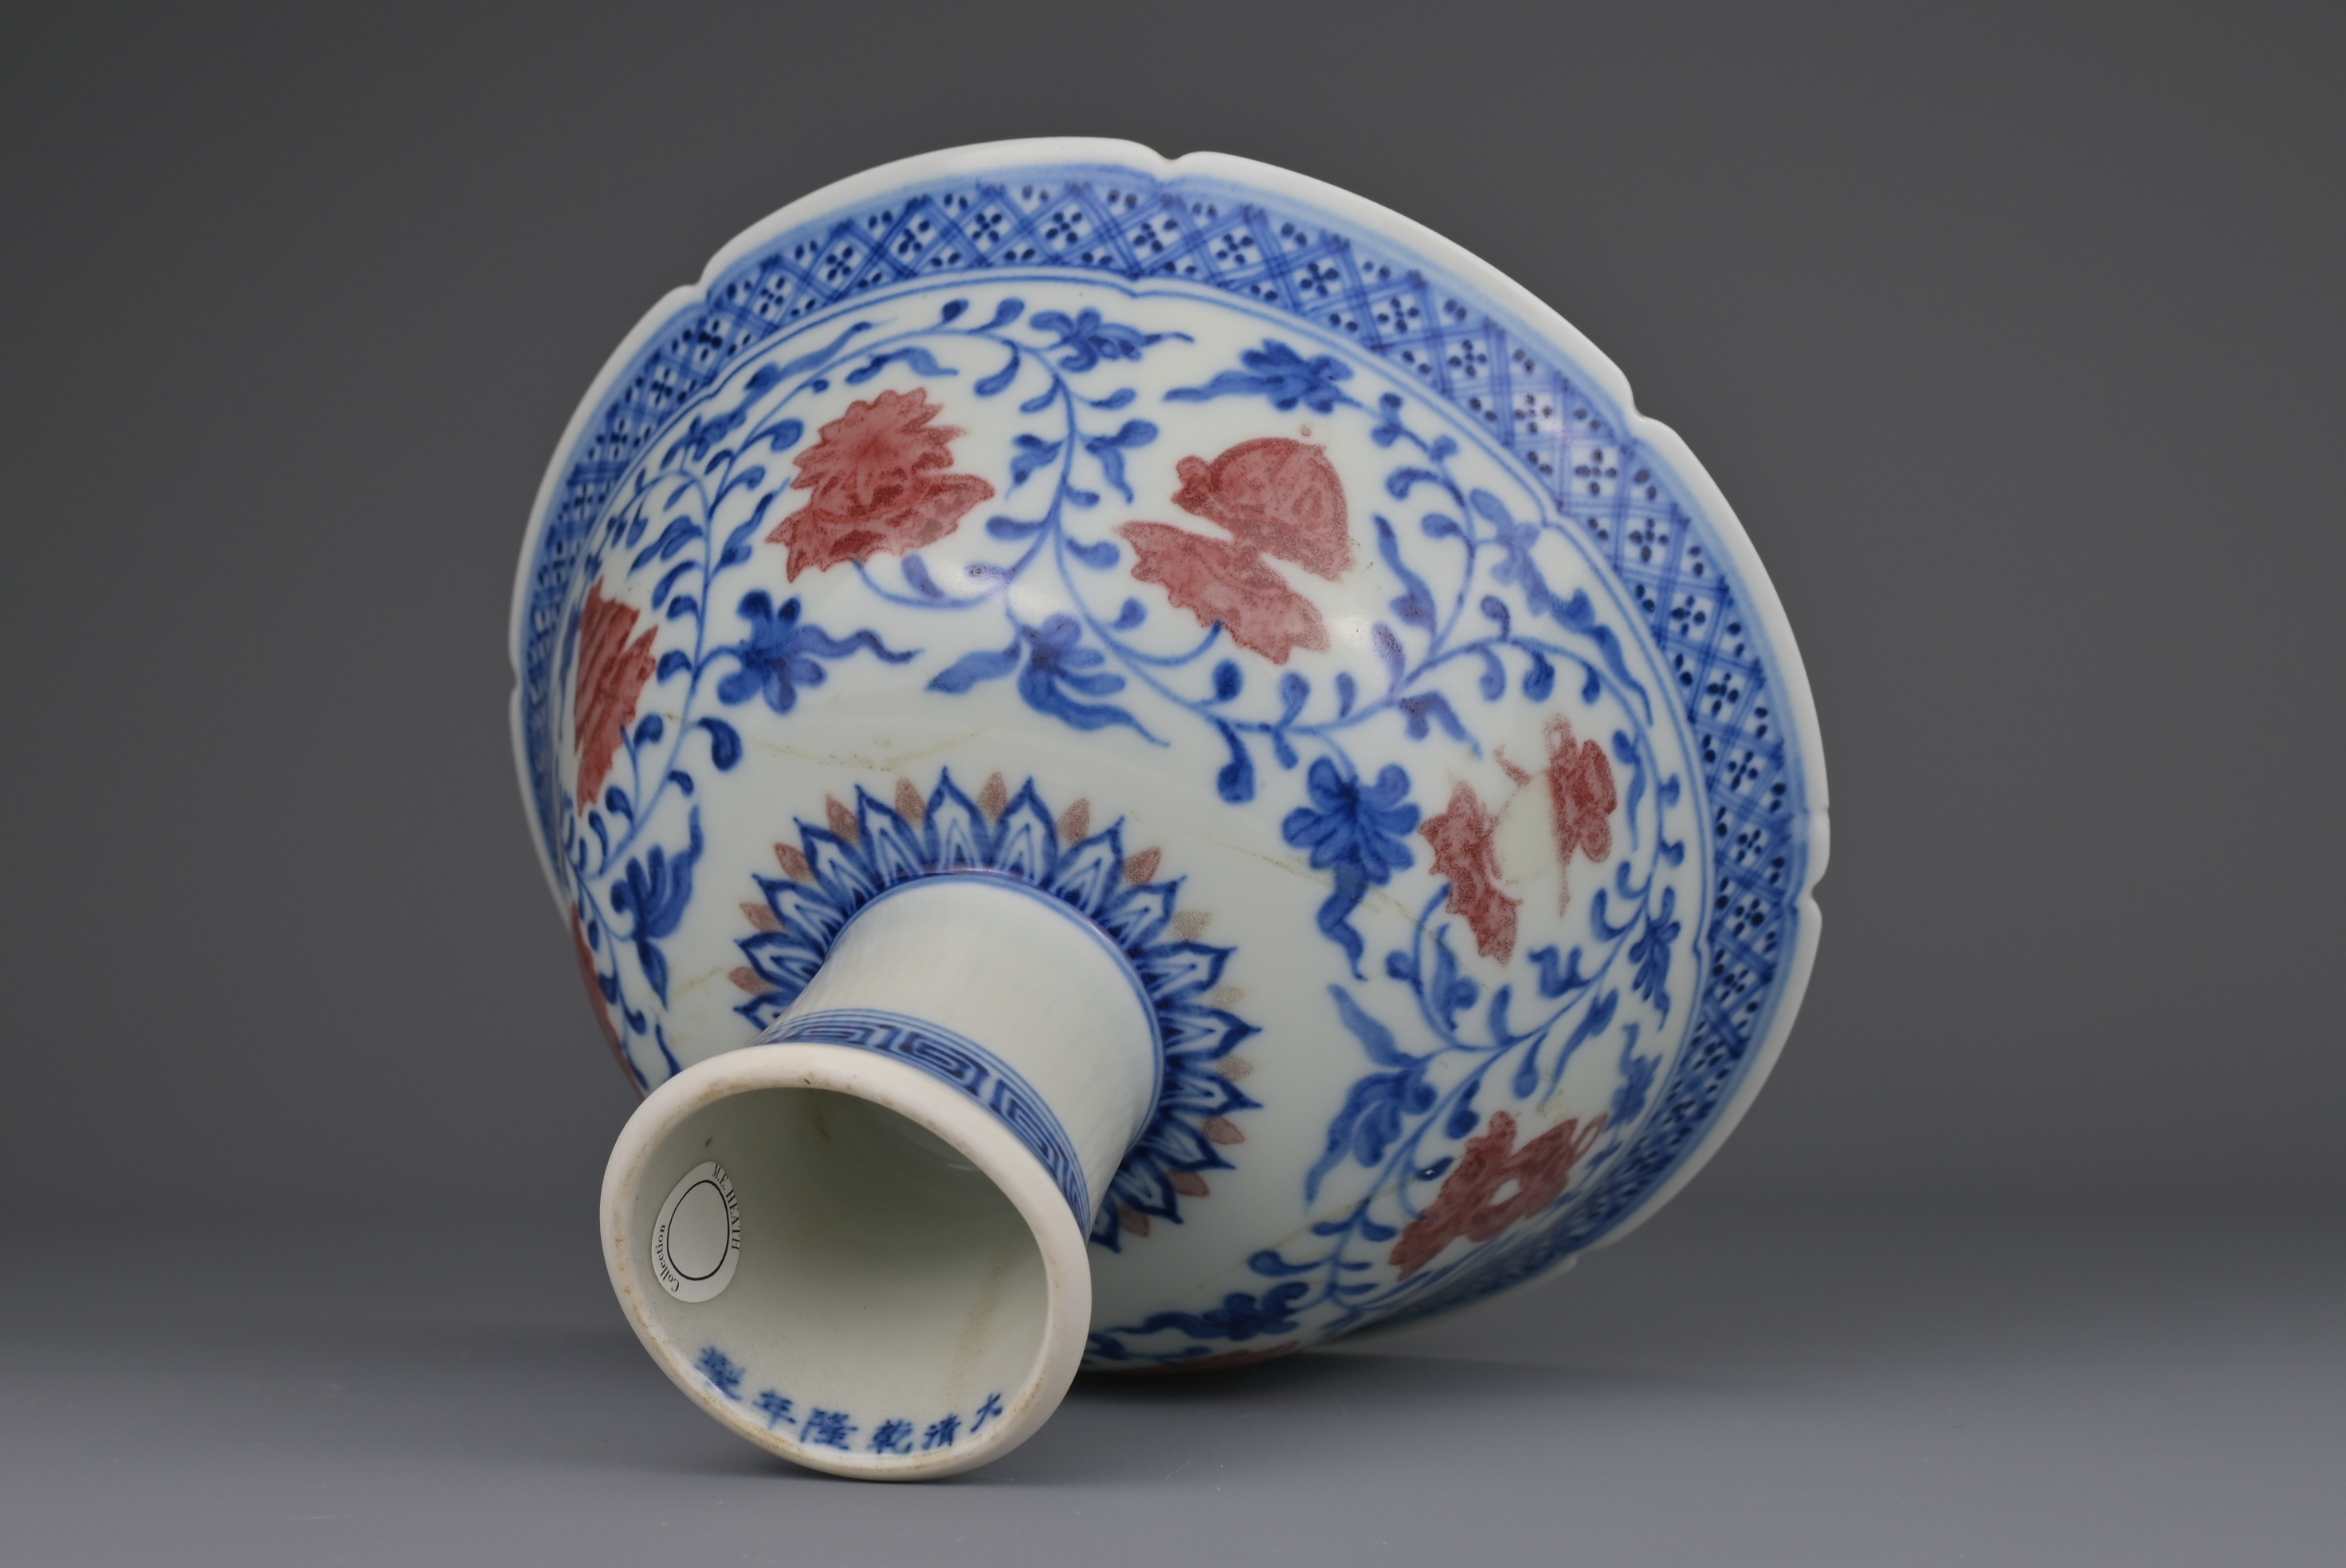 CHINESE UNDERGLAZE BLUE AND RED ‘BAJIXIANG’ PORCELAIN LOBED STEM CUP, QIANLONG MARK - Image 6 of 7